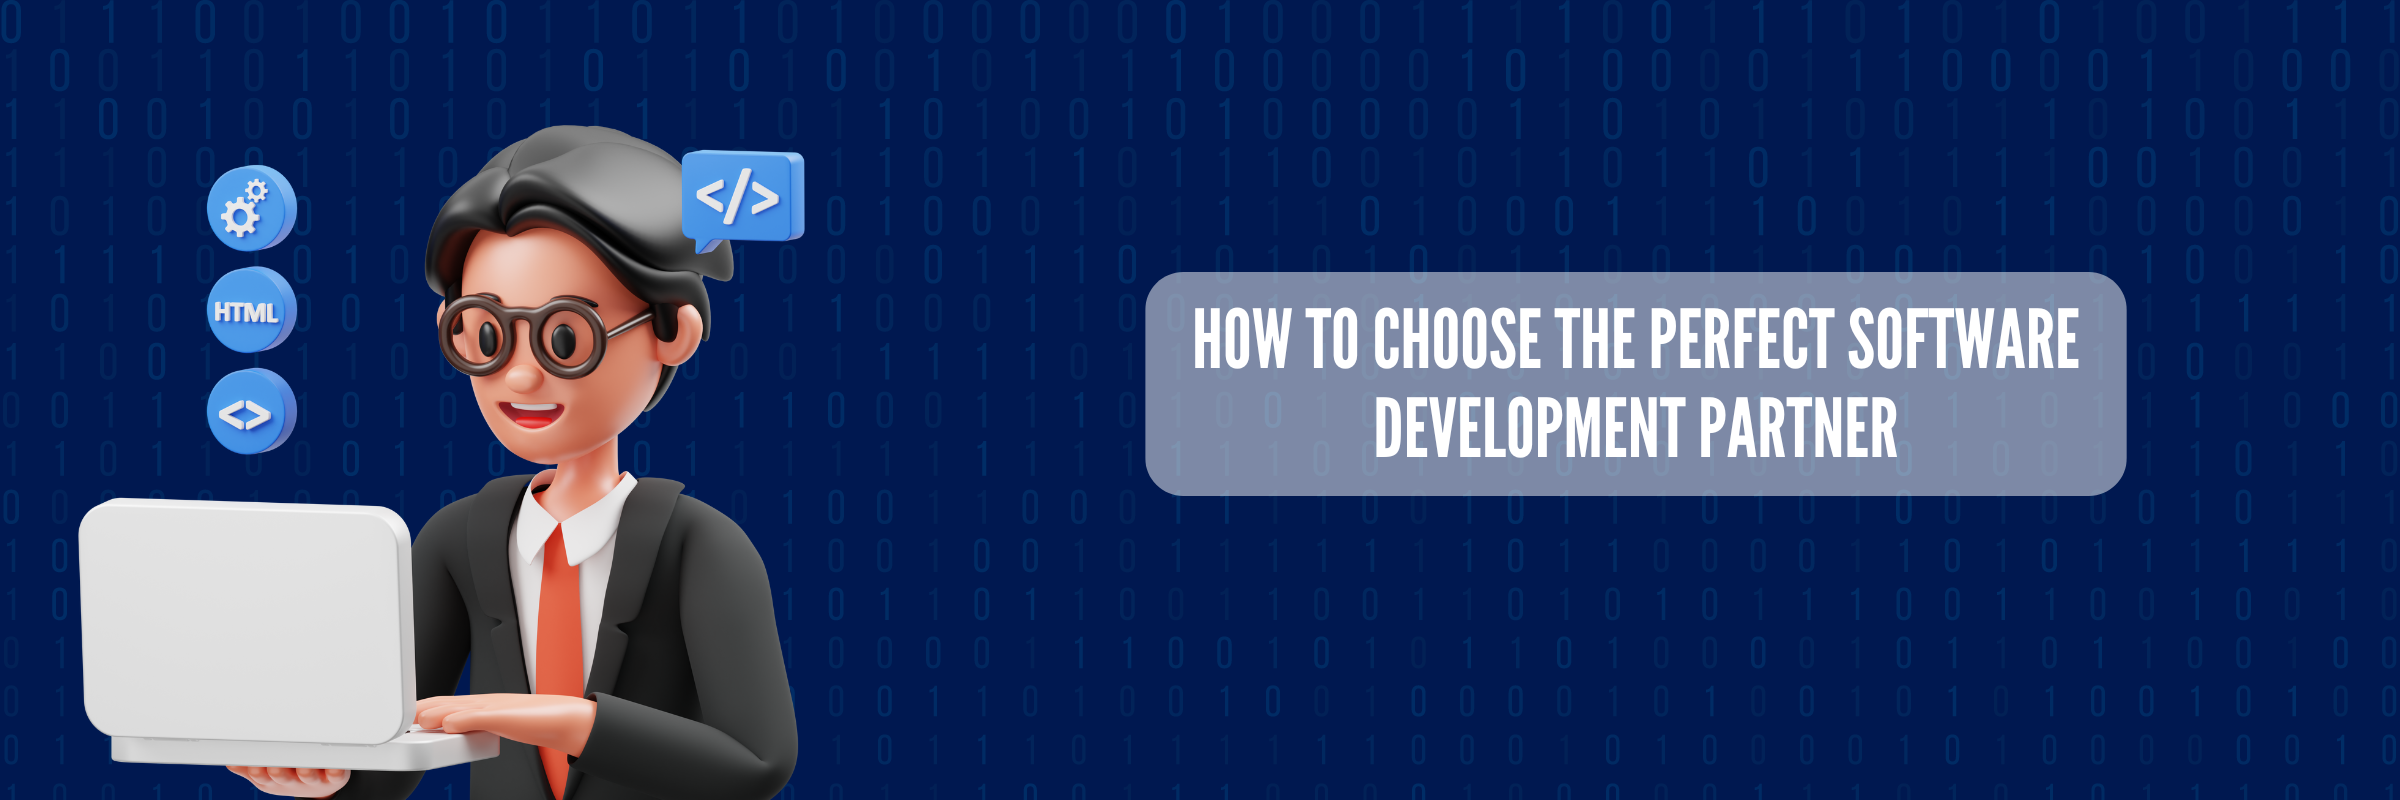 How to Choose the Perfect Software Development Partner?